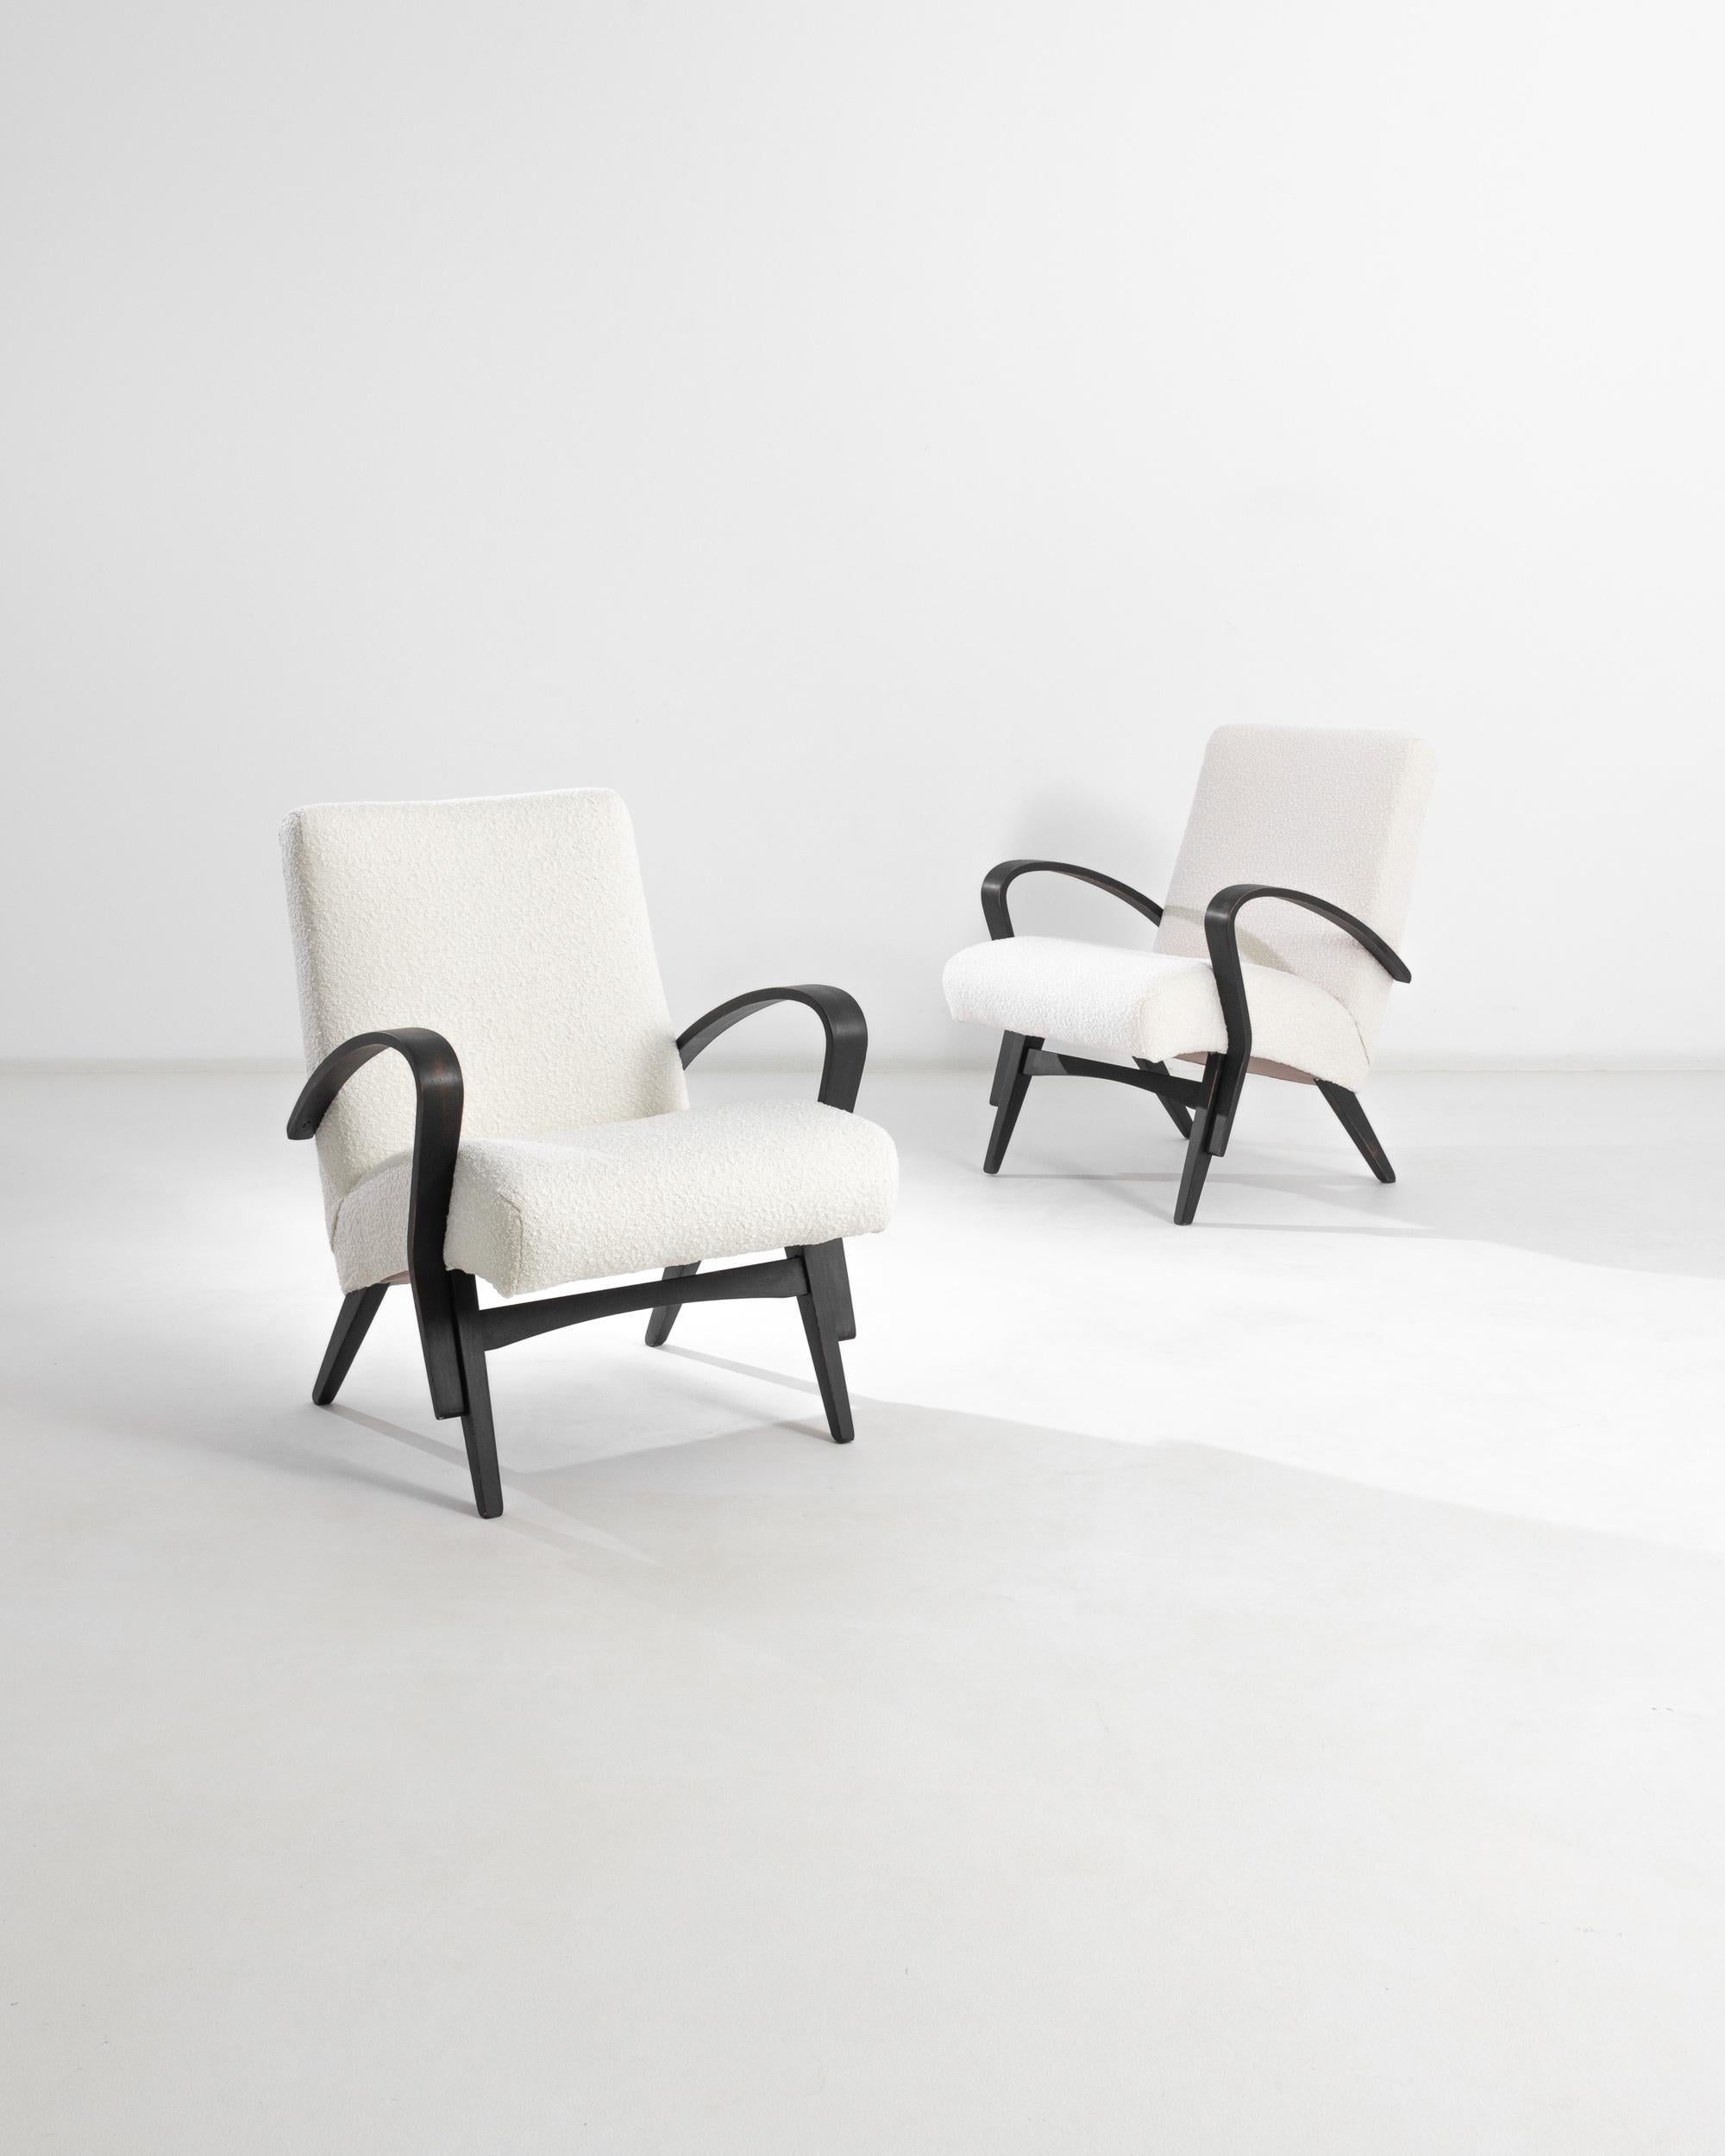 A pair of upholstered armchairs by Czech furniture manufacturer Tatra. Attributed to designer František Jirák who is known for his striking case pieces and wall units, and for playful compact furniture that distinguish Czech Design of the mid-20th